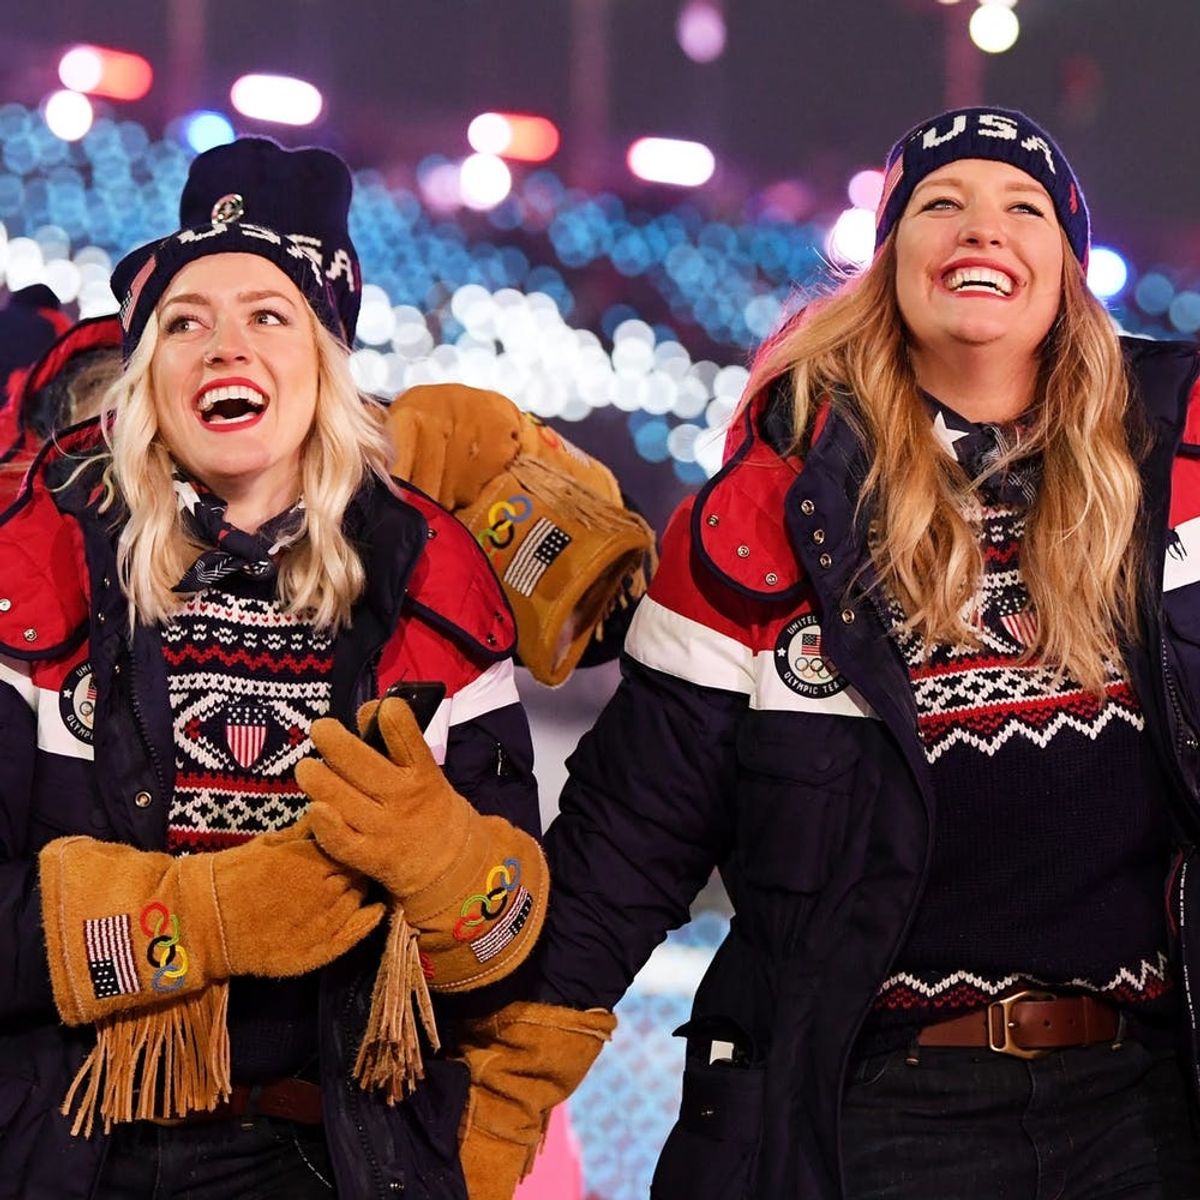 Team USA’s 2018 Winter Olympics Opening Ceremony Entrance Is Your Friday Inspiration